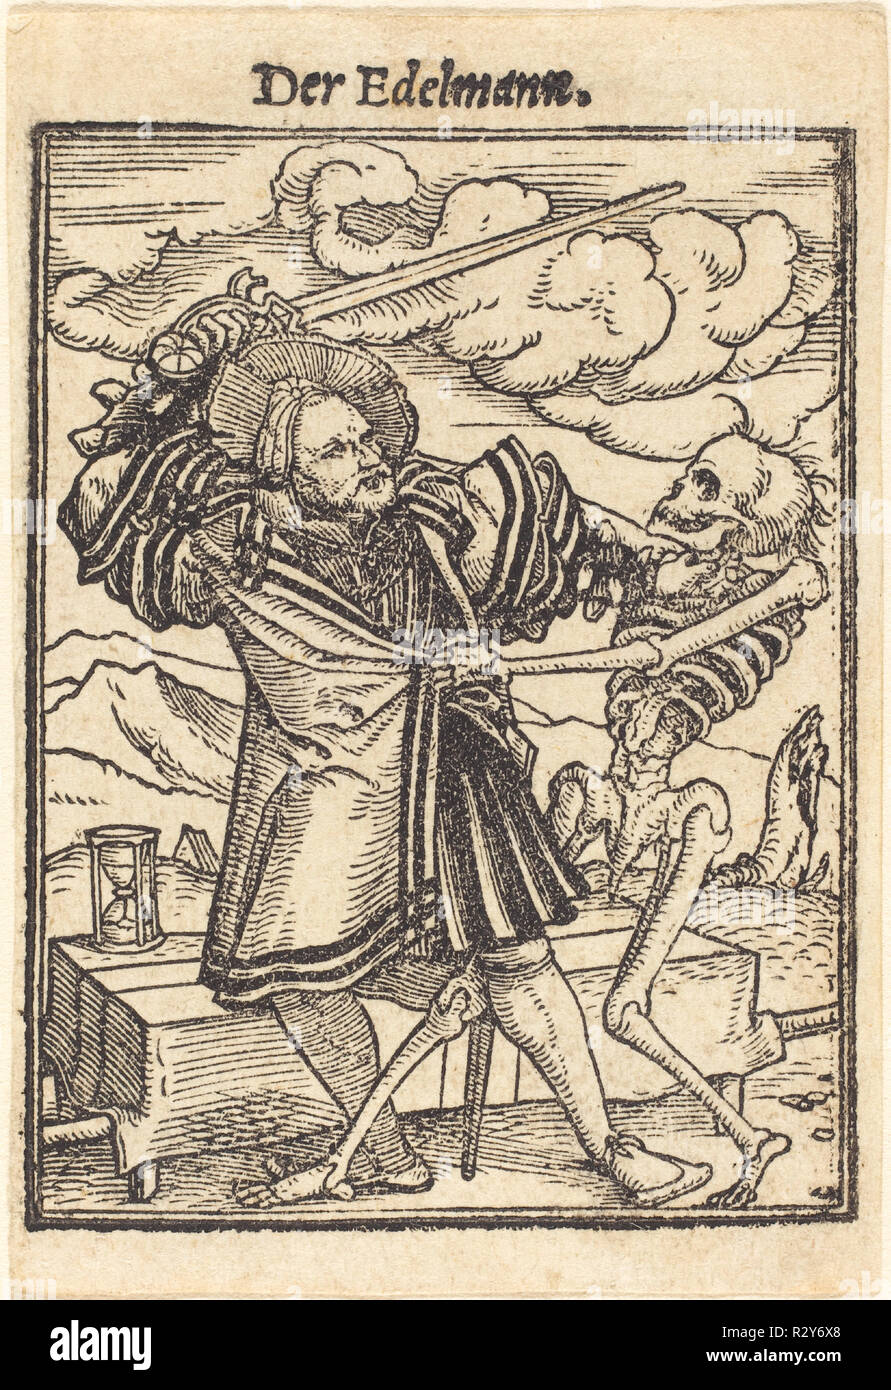 Nobleman. Medium: woodcut. Museum: National Gallery of Art, Washington DC. Author: Hans Holbein the Younger. Stock Photo